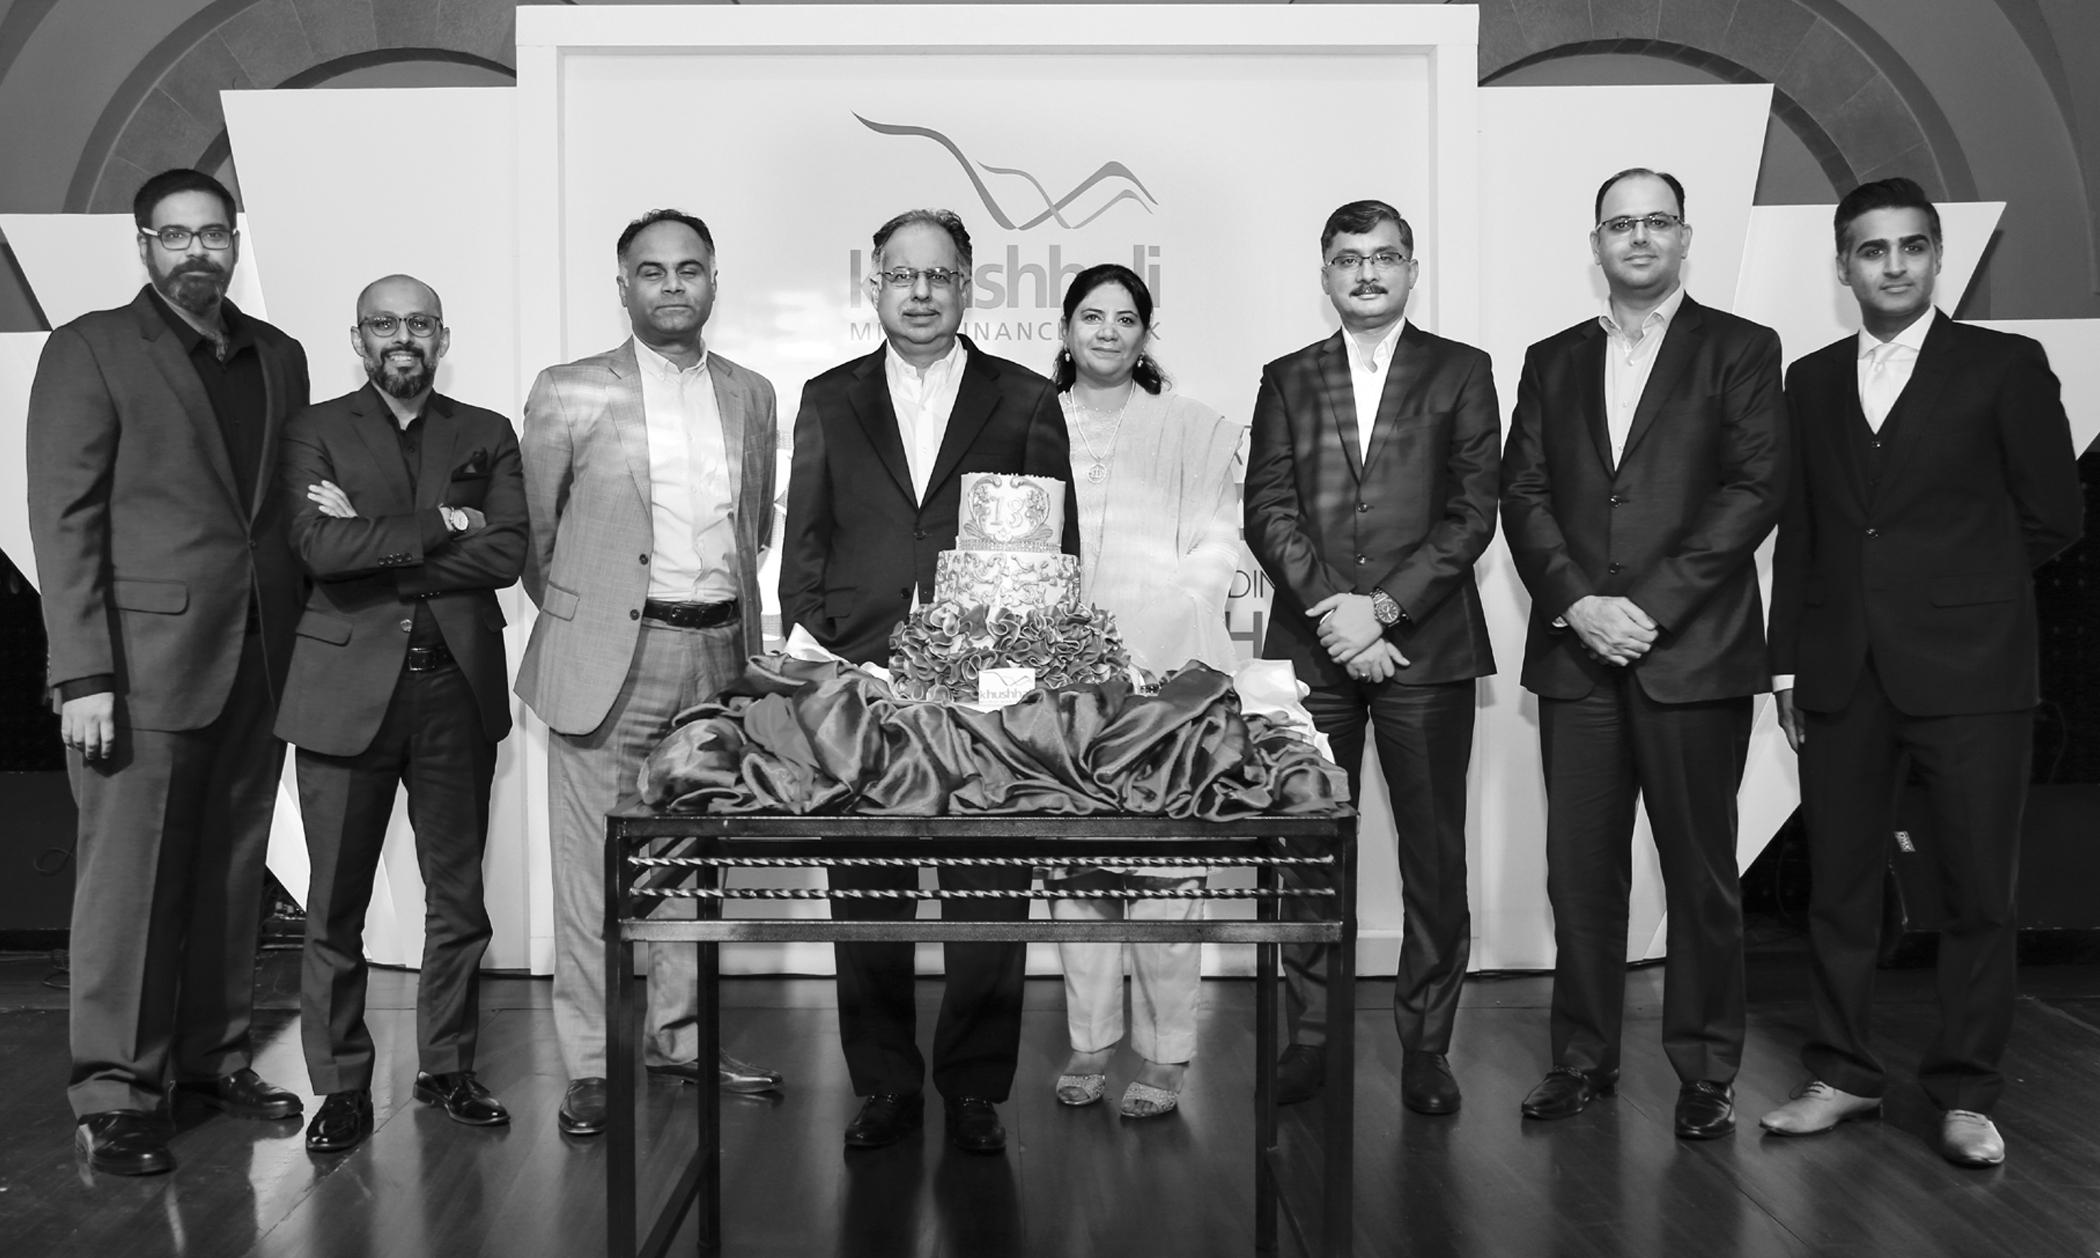 Khushhalibank celebrated 18 years of Microfinance excellence